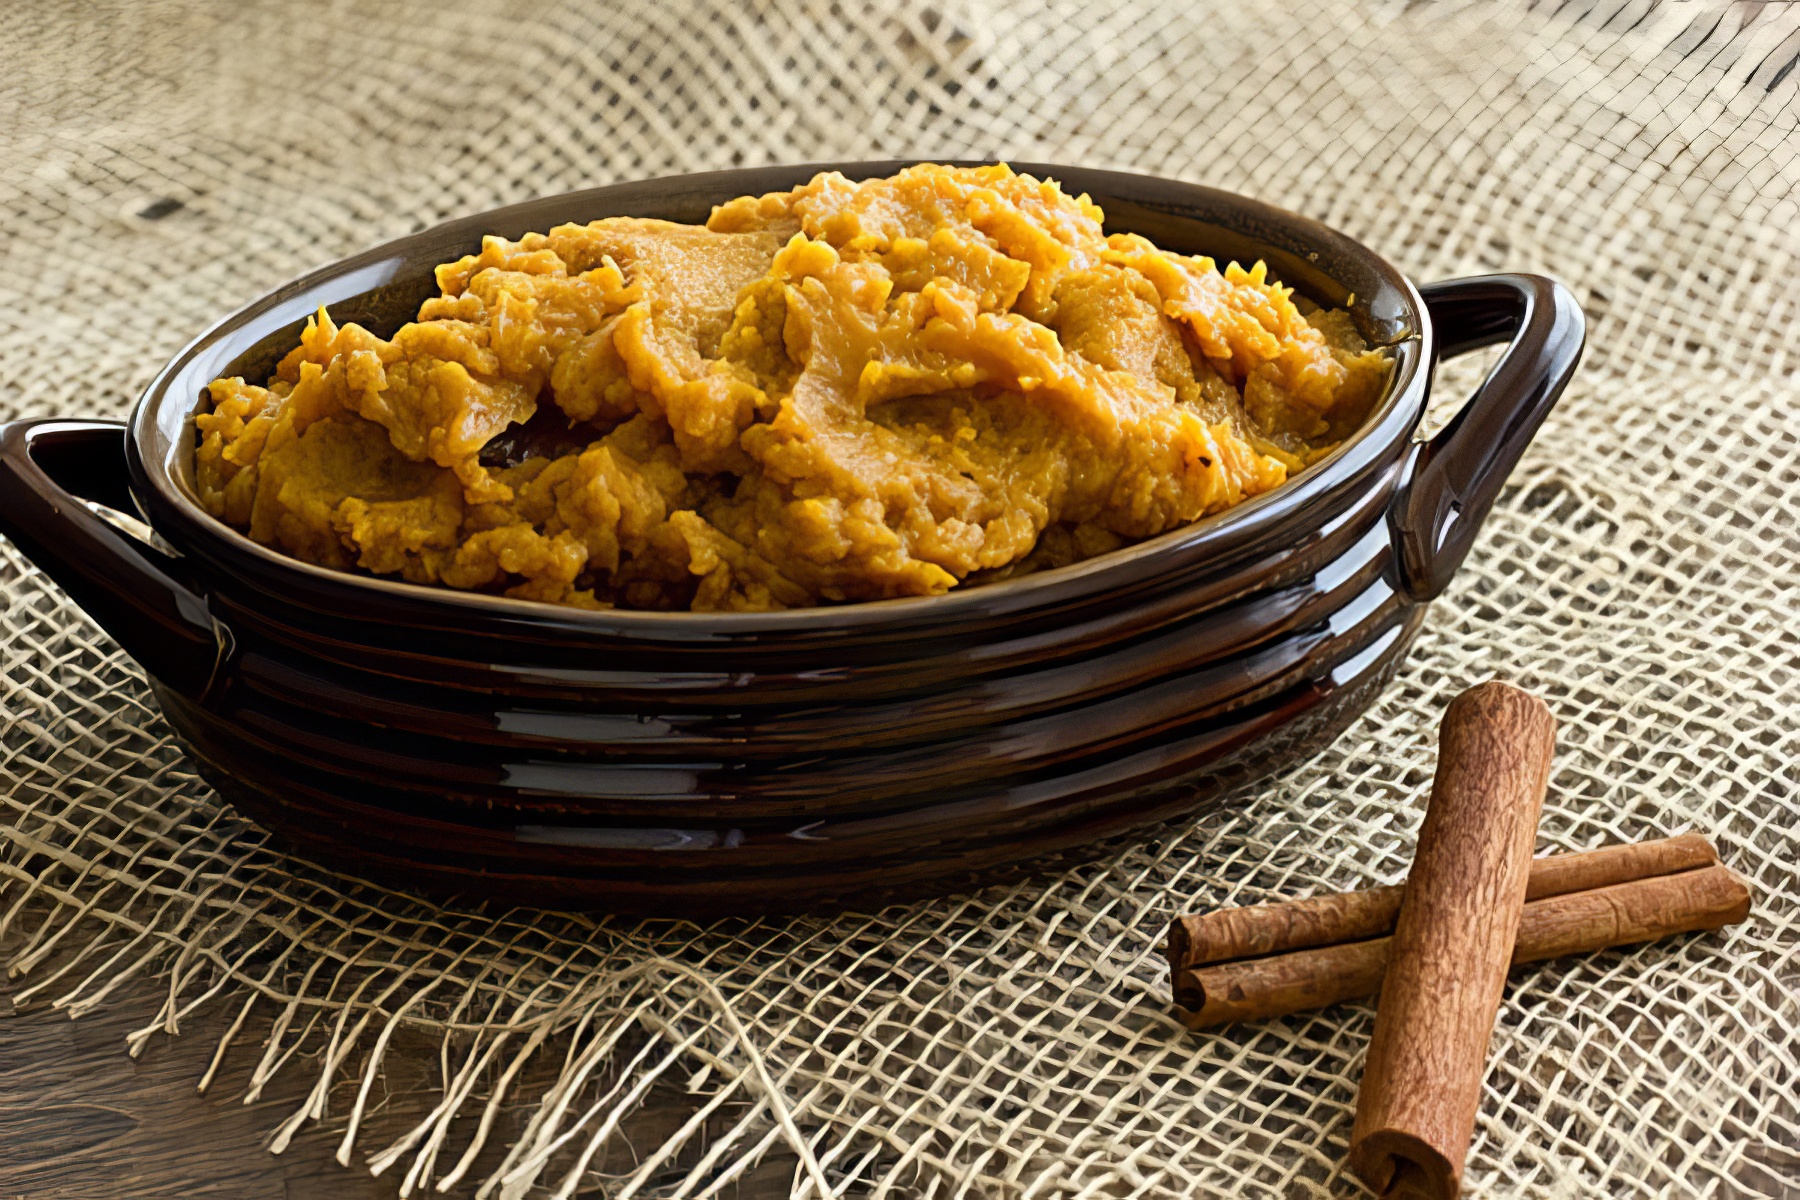 mashed sweet potatoes with brown sugar and chai spices